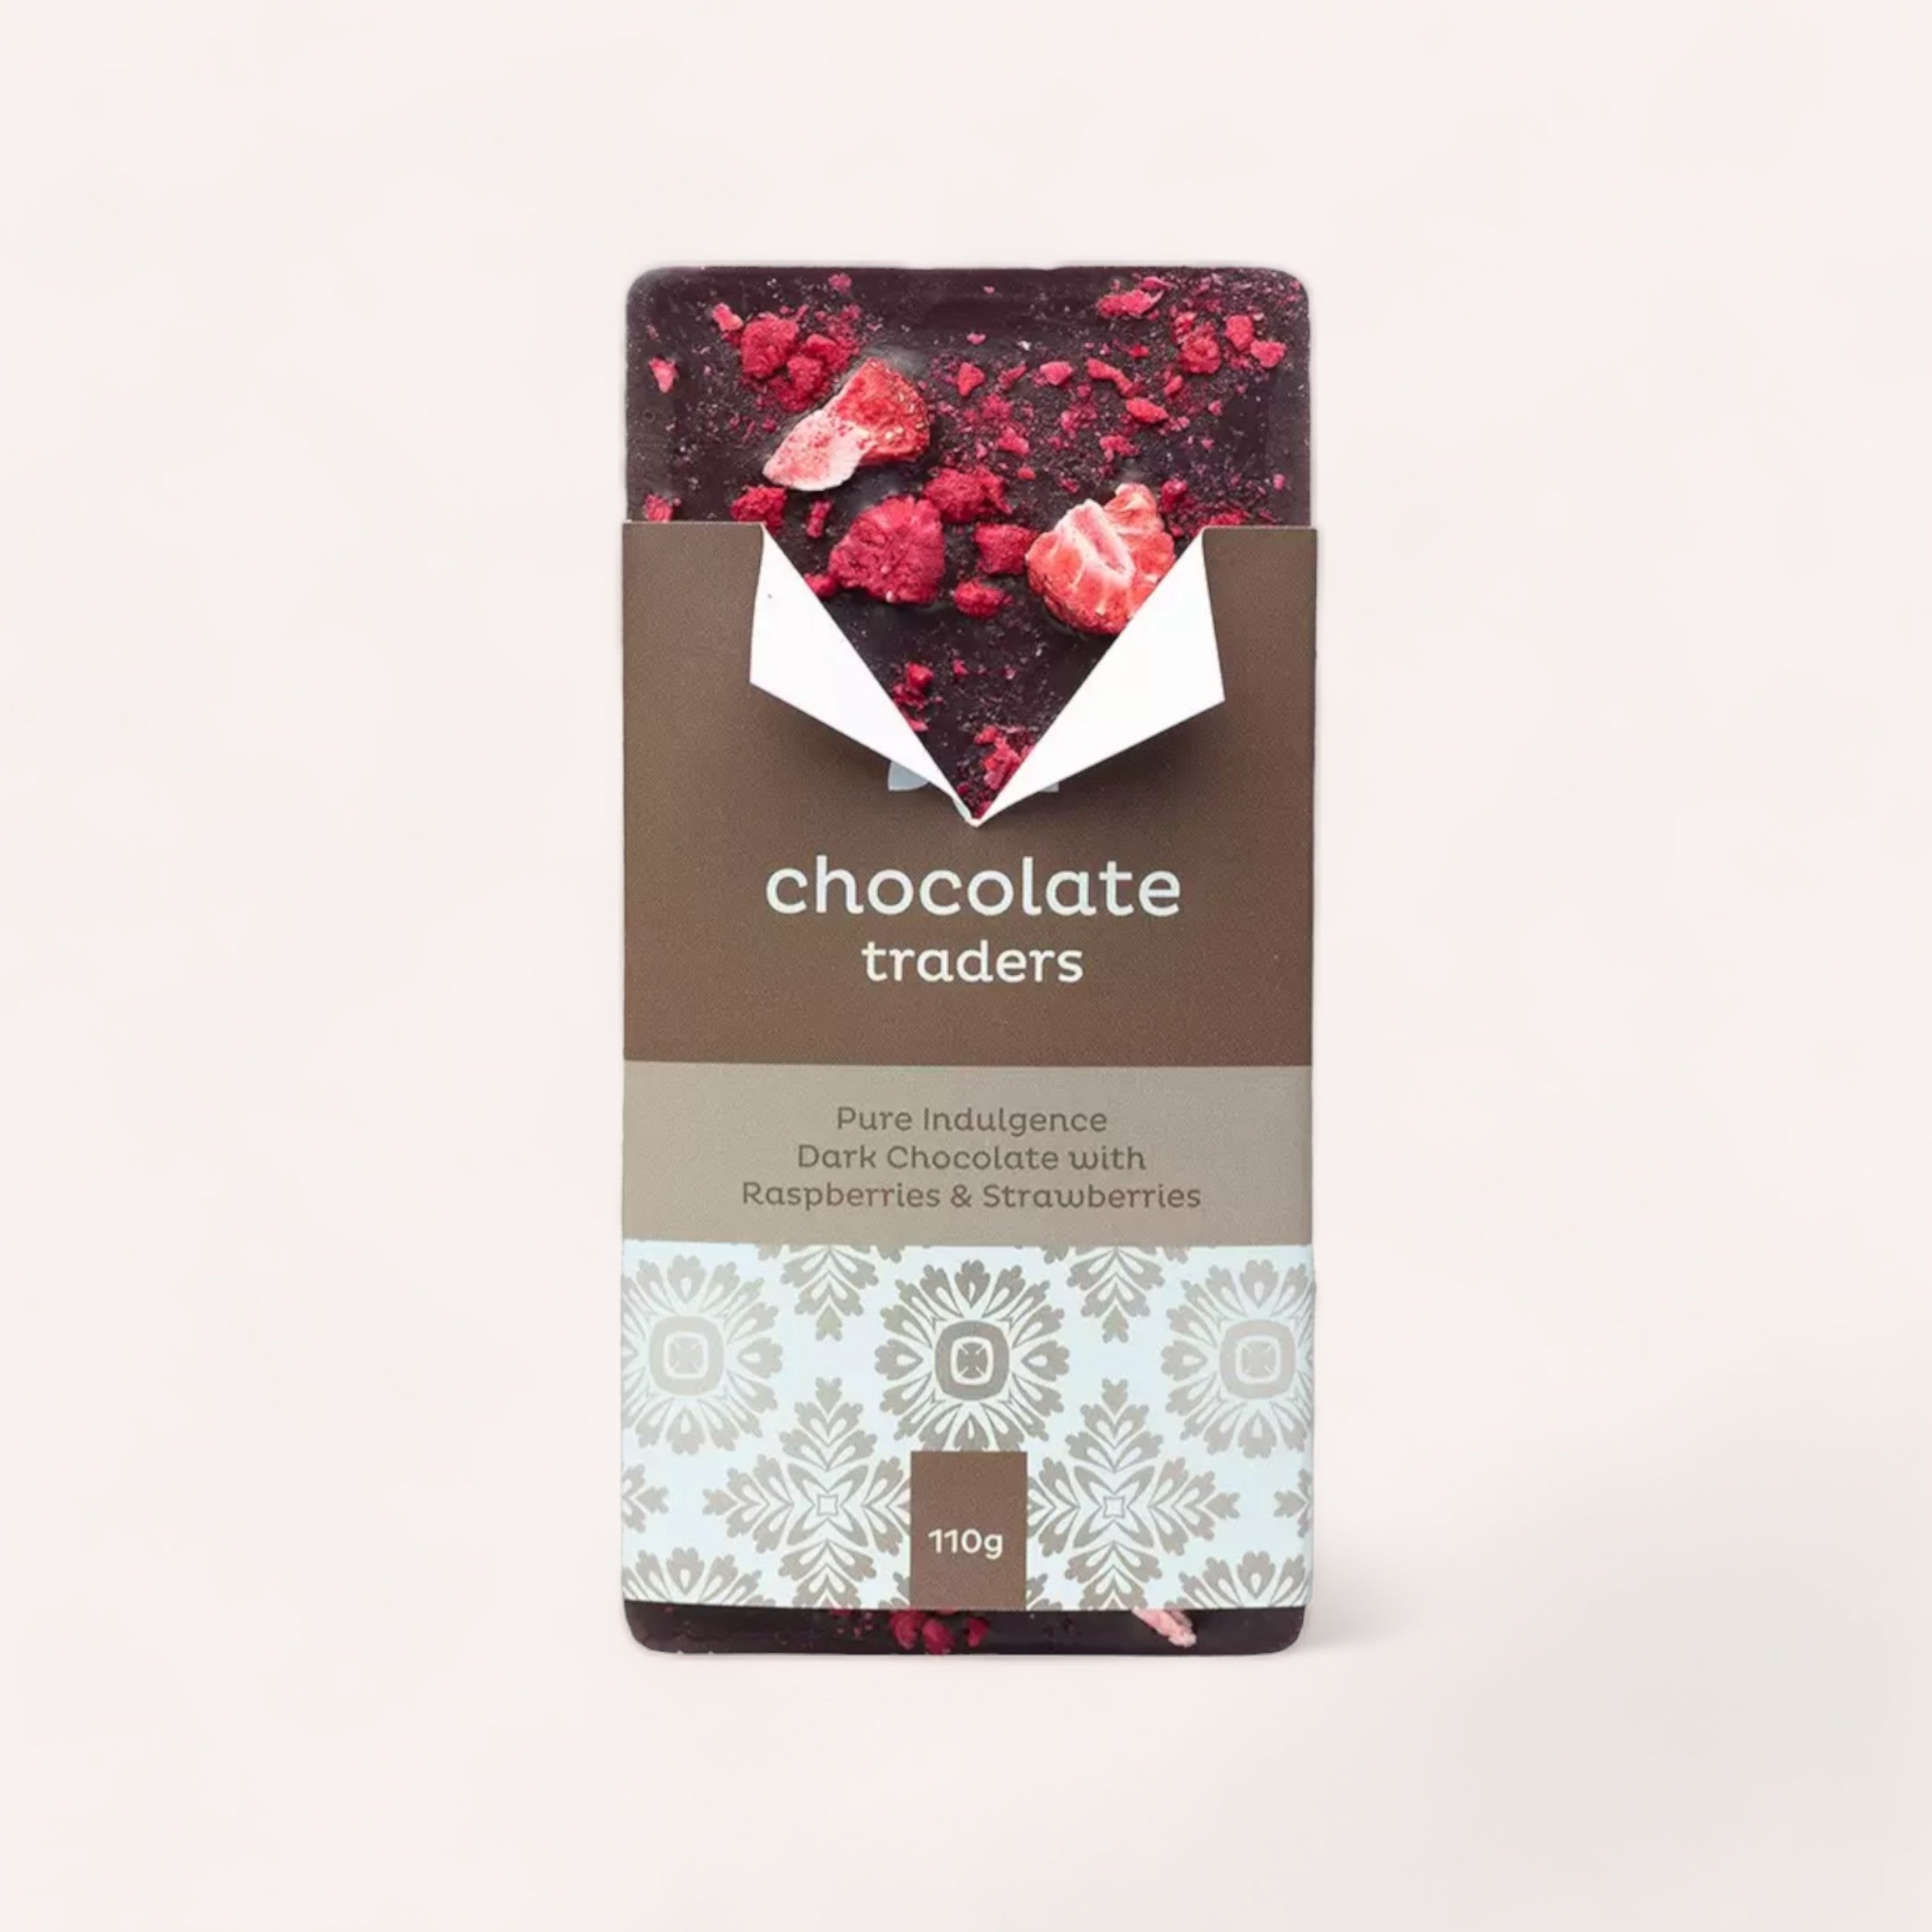 A bar of Pure Indulgence Raspberries & Strawberries by Chocolate Traders, elegantly presented in a wrapper as a gift, hinting at a rich and fruity taste experience.